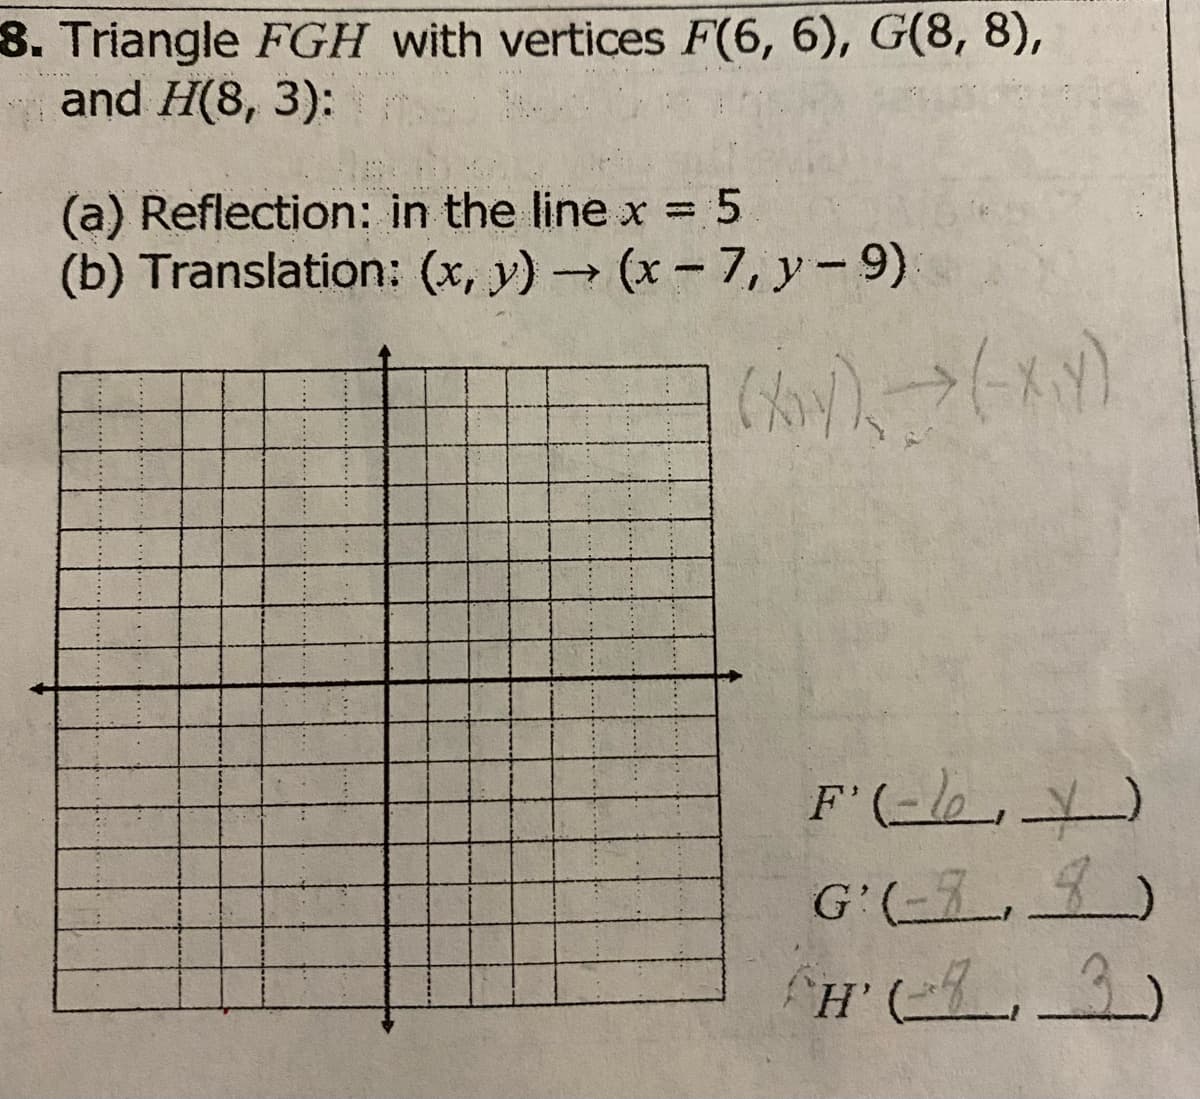 8. Triangle FGH with vertices F(6, 6), G(8, 8),
and H(8, 3):
(a) Reflection: in the line x =
(b) Translation: (x, y) (x-7, y-9)
F'(-lo,)
G'(-3_ , 9)
